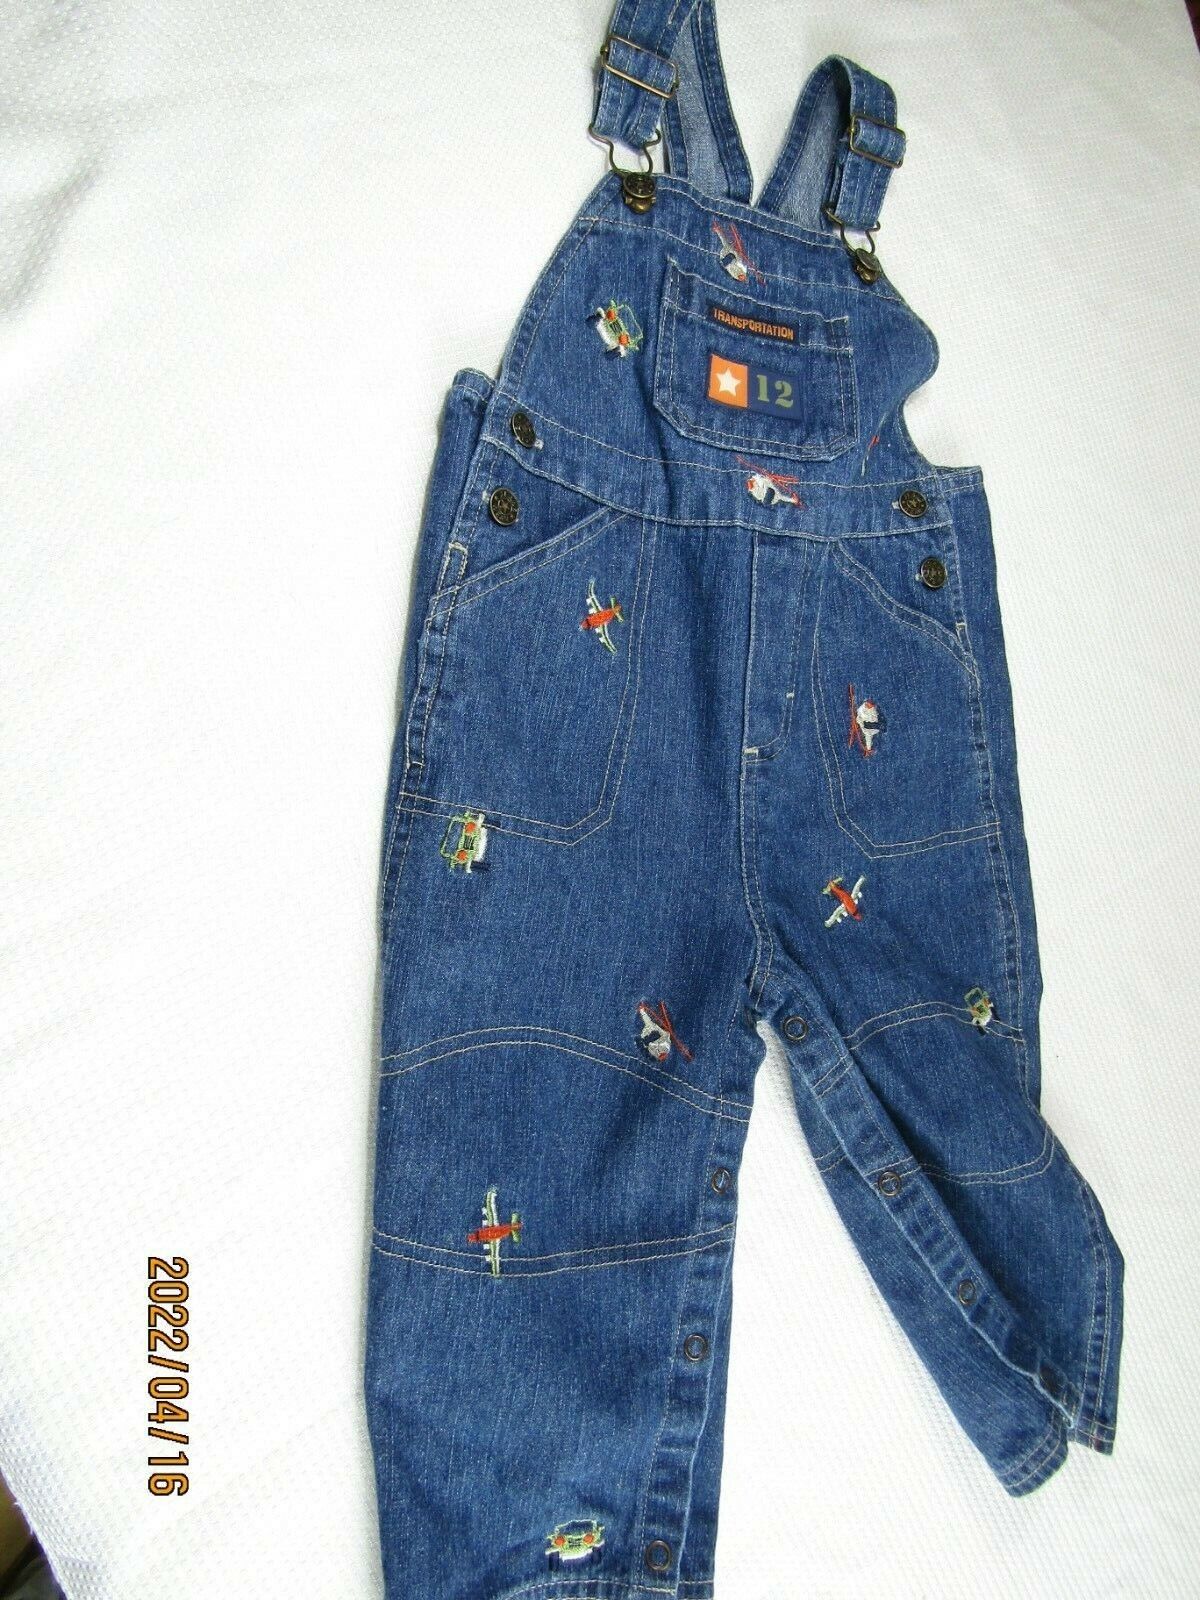 Toddler Blue Denim Jean One Piece 24 Tr Clearance SALE Limited time Months Complete Free Shipping Bib Overalls Size